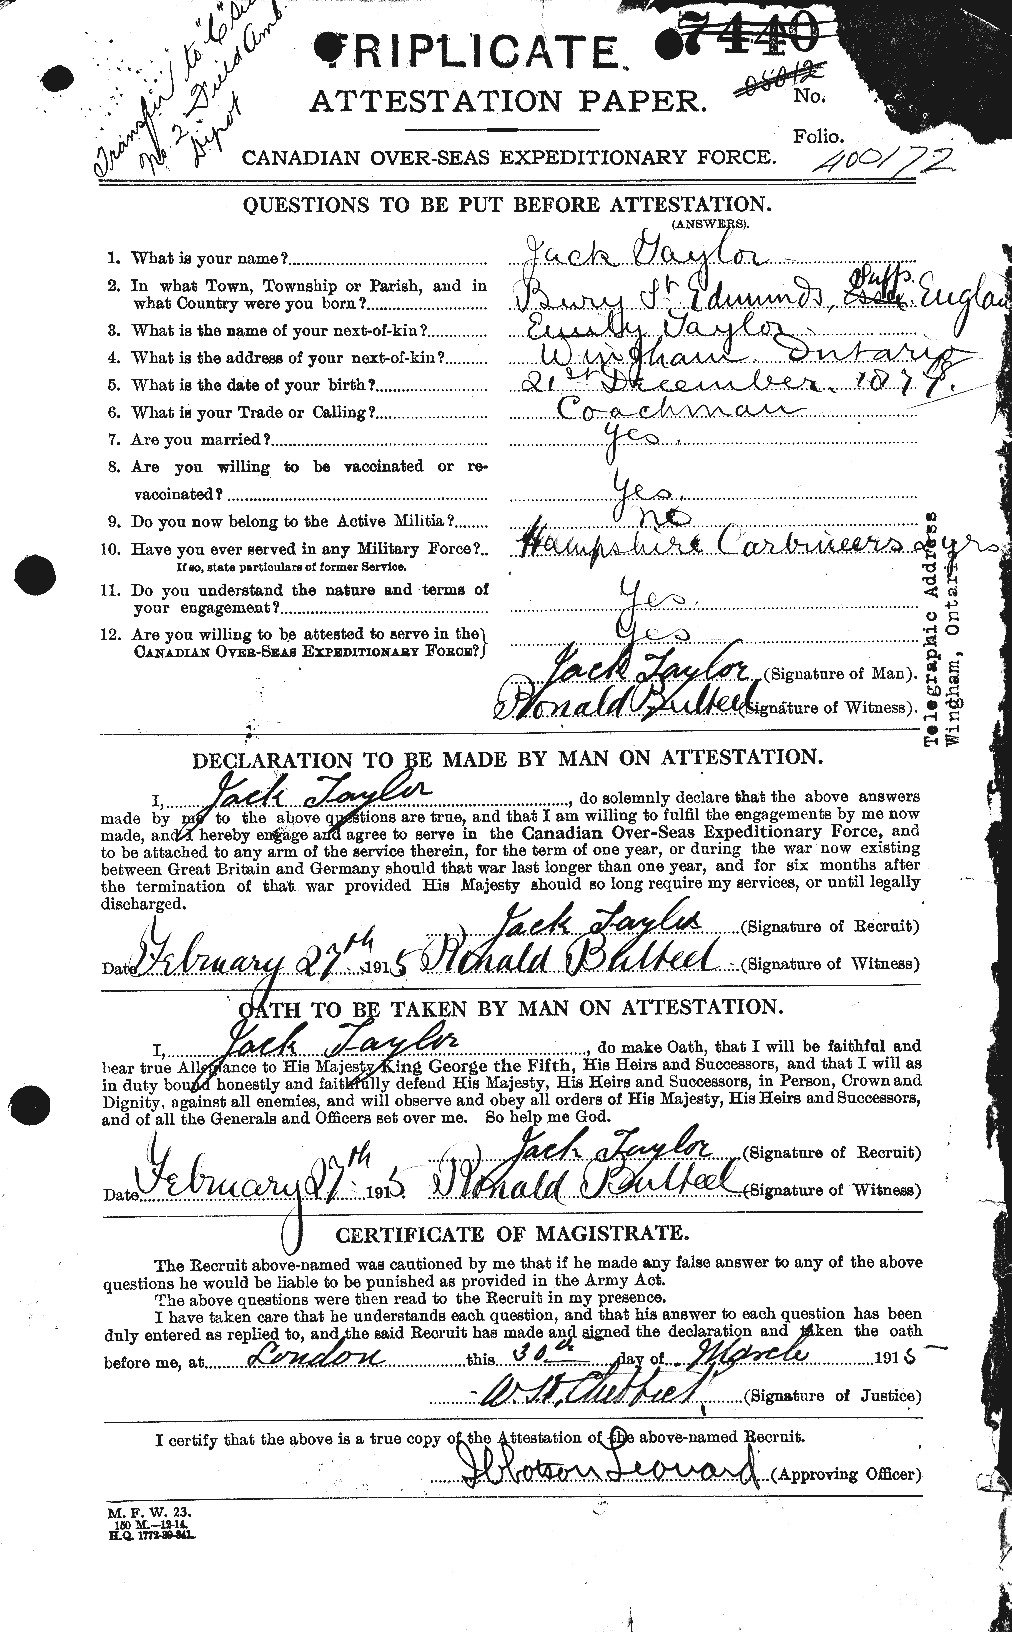 Personnel Records of the First World War - CEF 626640a